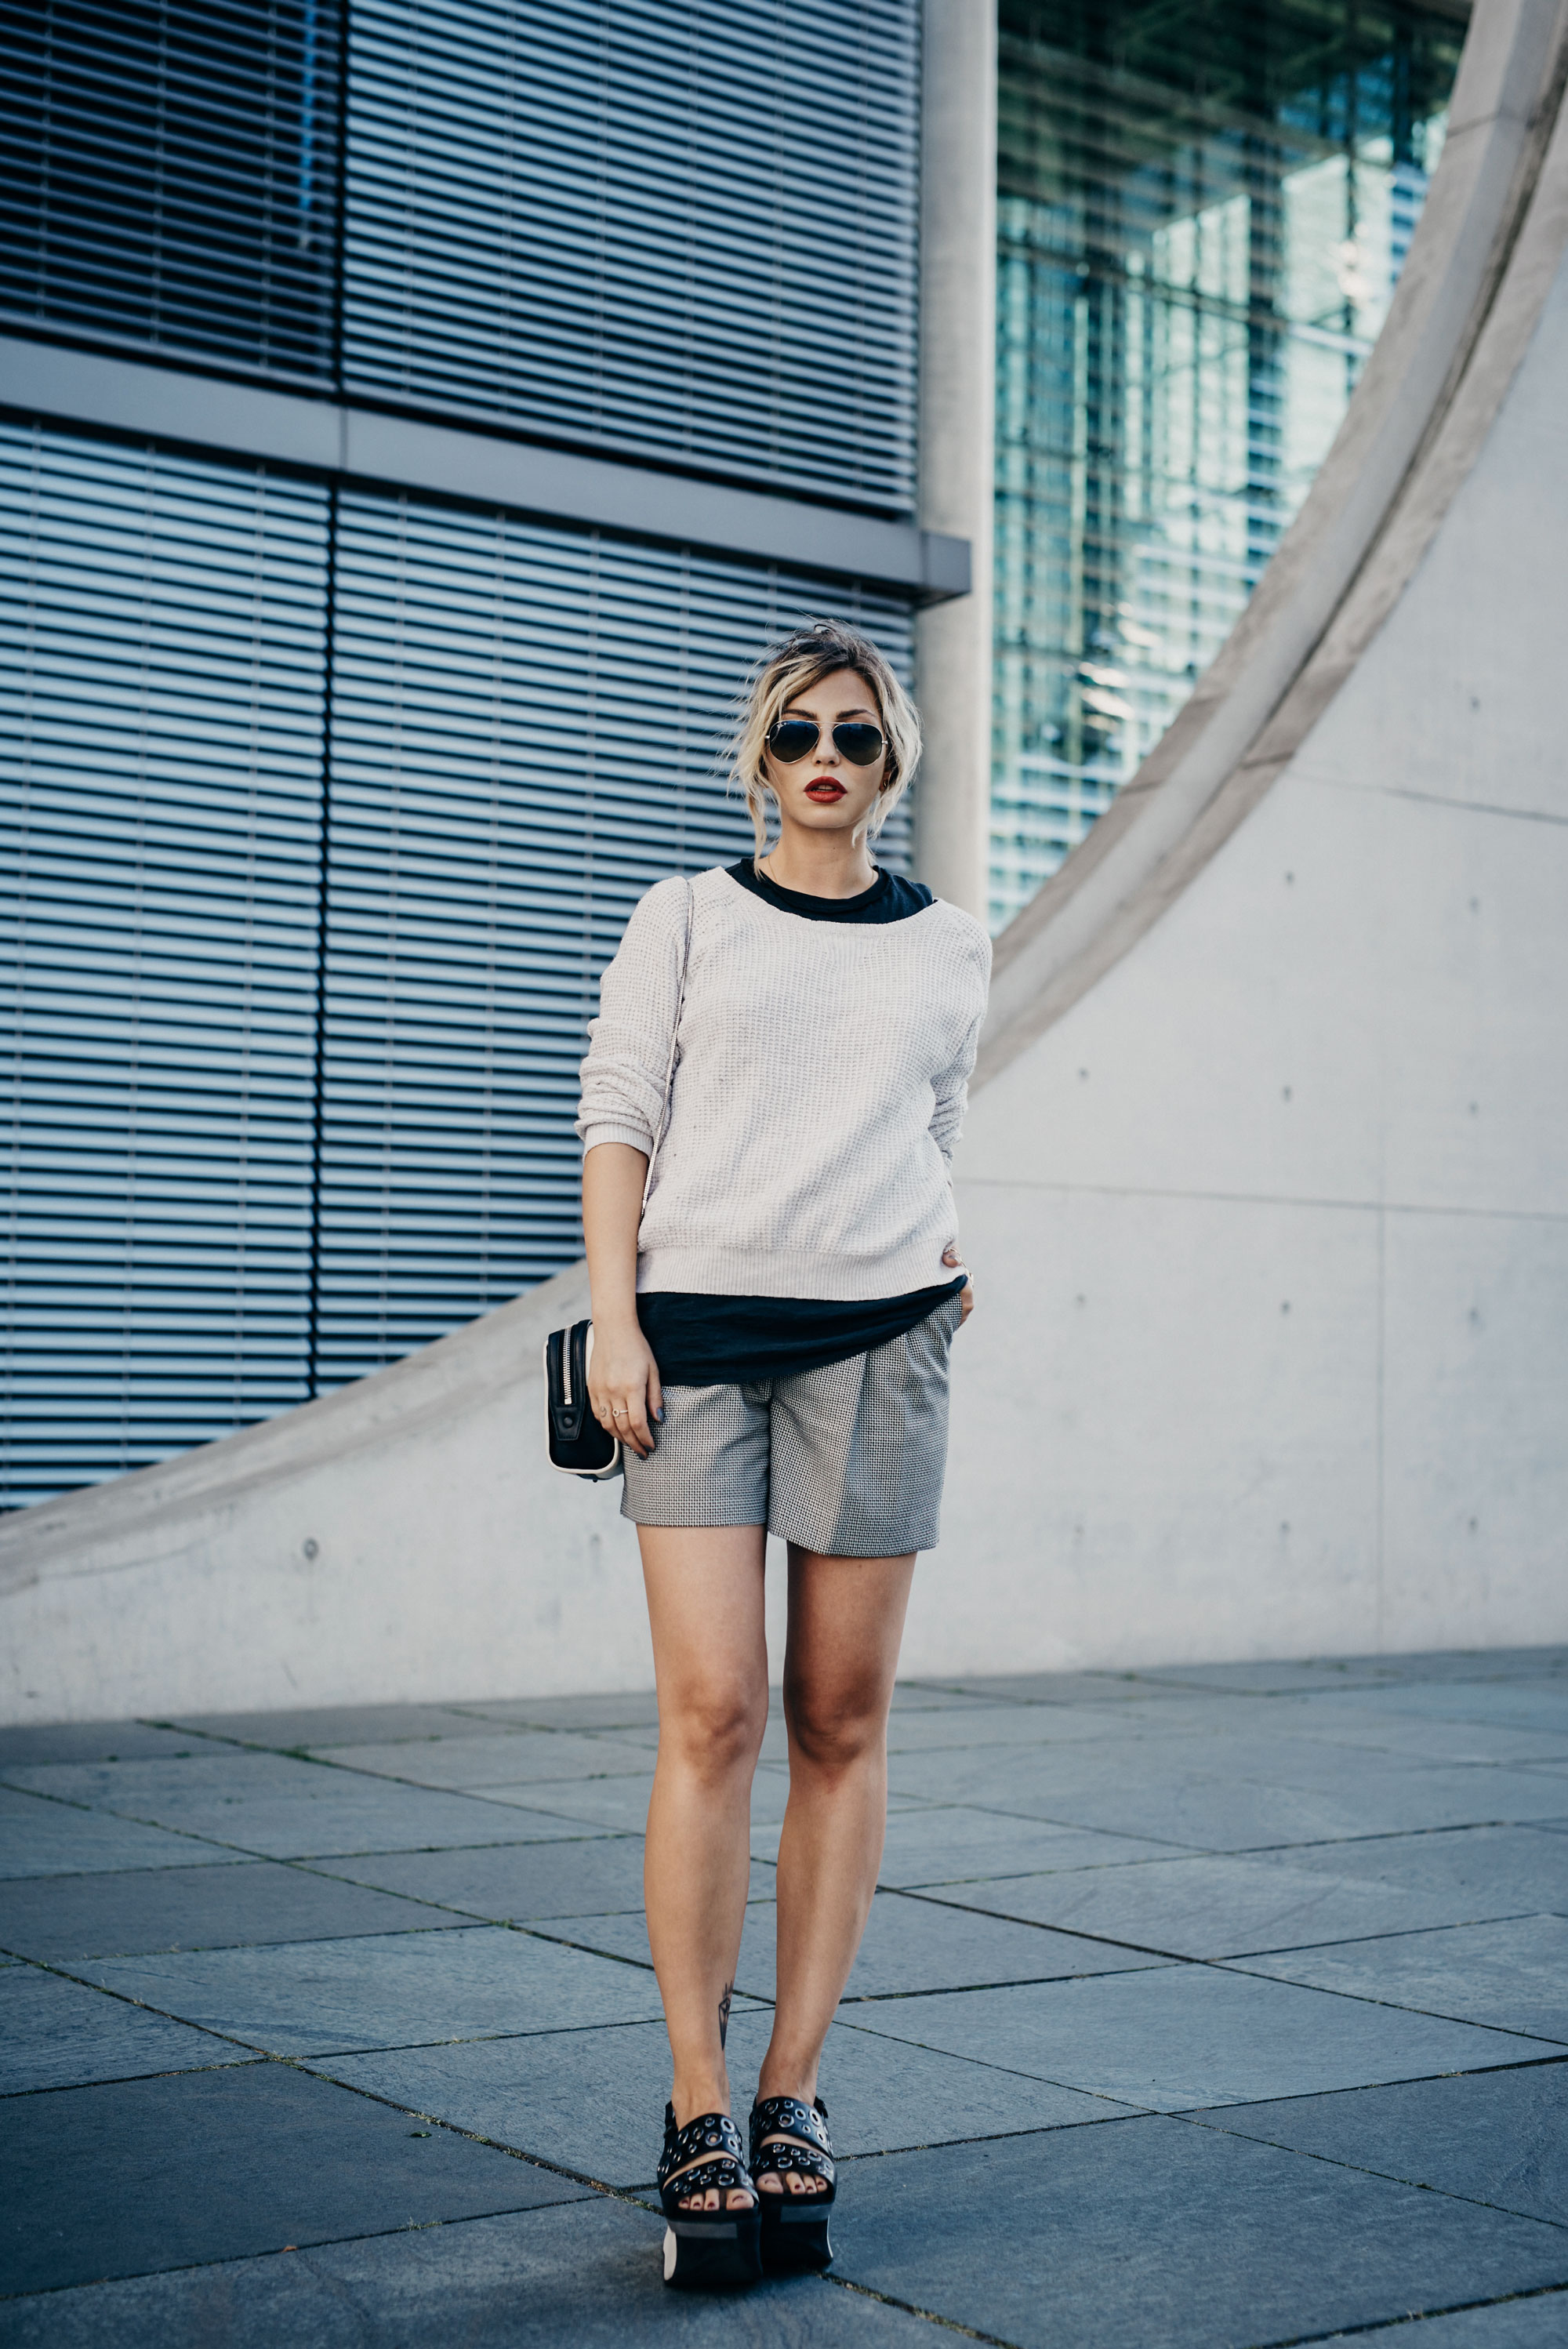 How to: office outfits | back to work in summer shorts| style: formal, chic, effortless cool | find more pictures on my blog